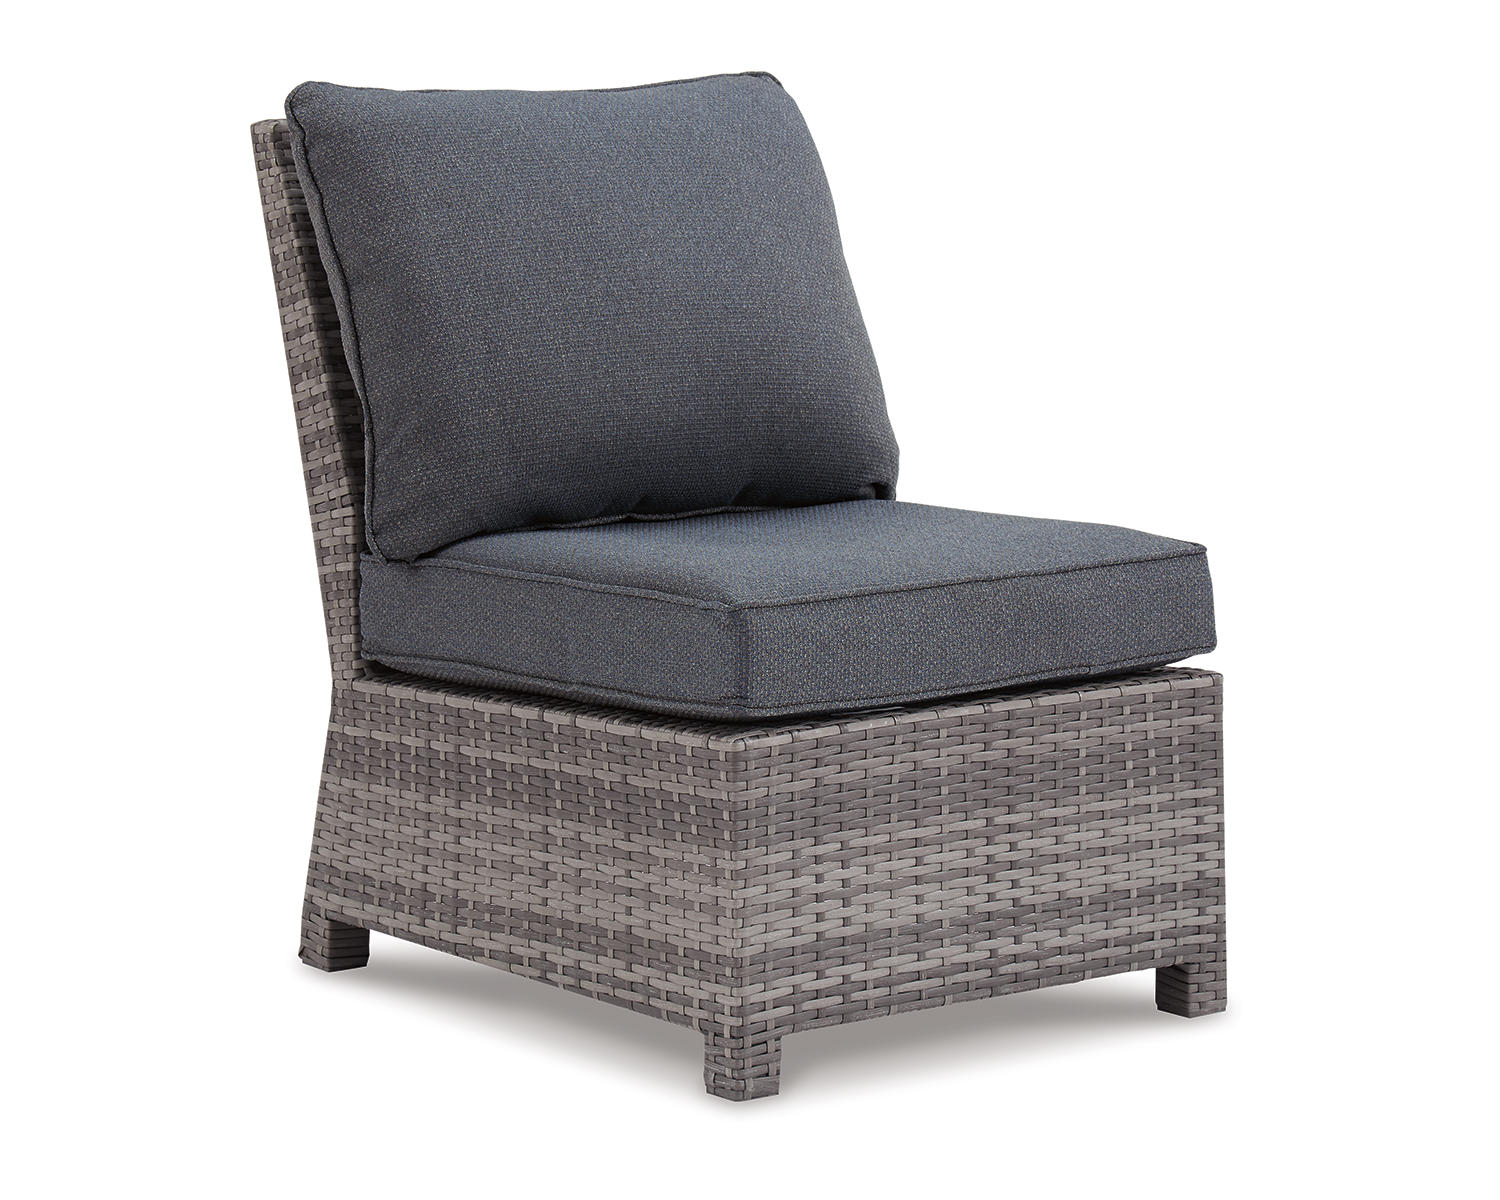 Signature Design by Ashley Salem Beach Outdoor Resin Wicker Armless Chair, Gray - image 1 of 6